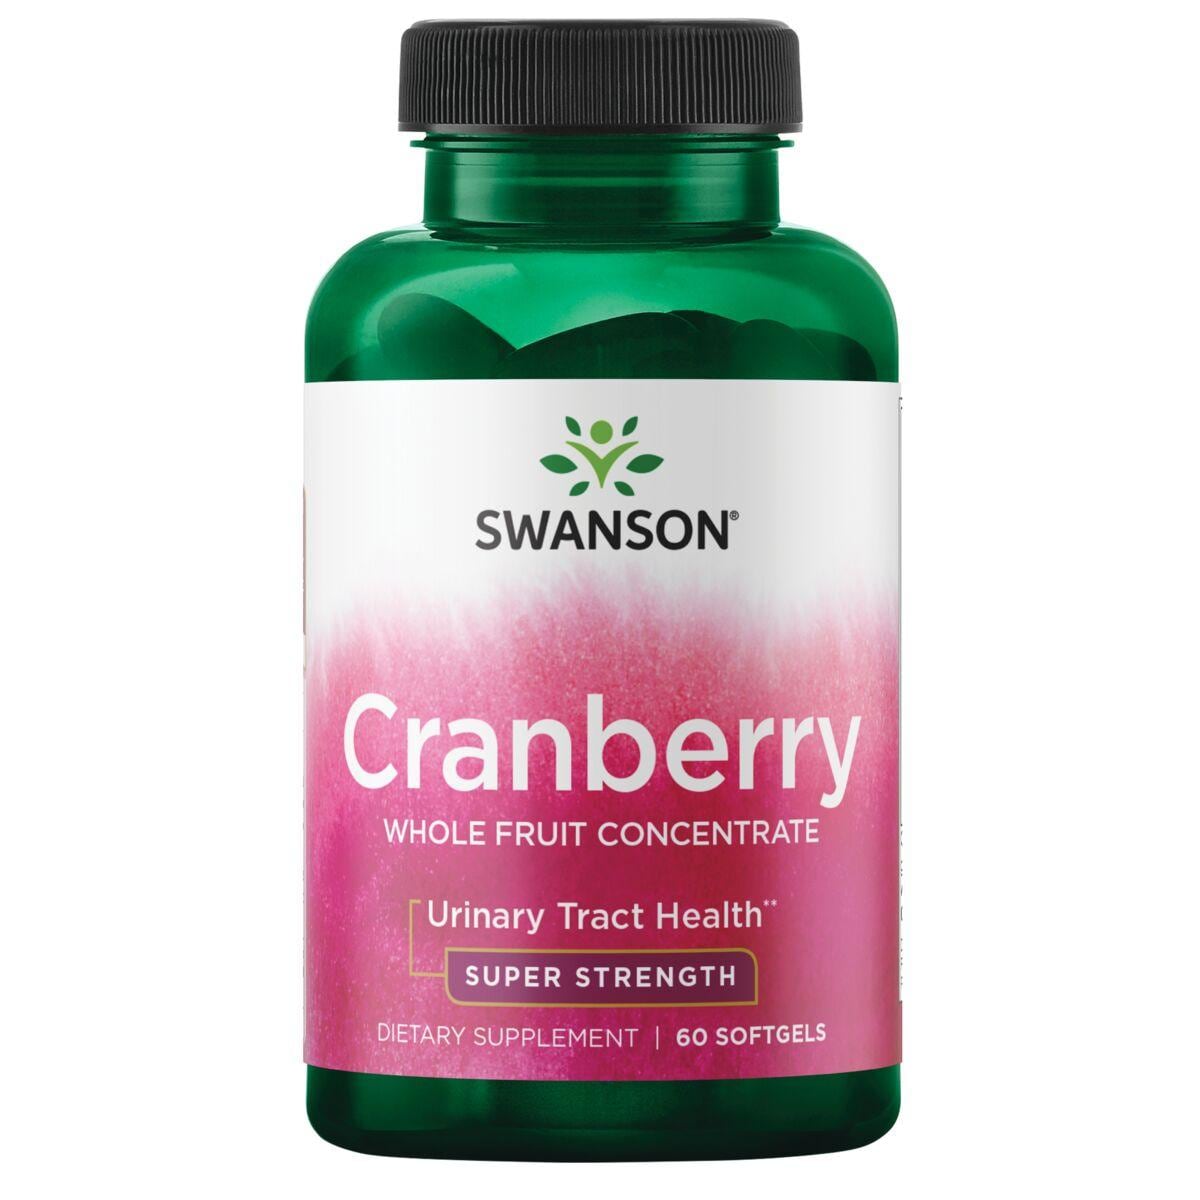 Swanson Ultra Cranberry Whole Fruit Concentrate - Super Strength Vitamin | 420 mg | 60 Soft Gels | Herbs and Supplements